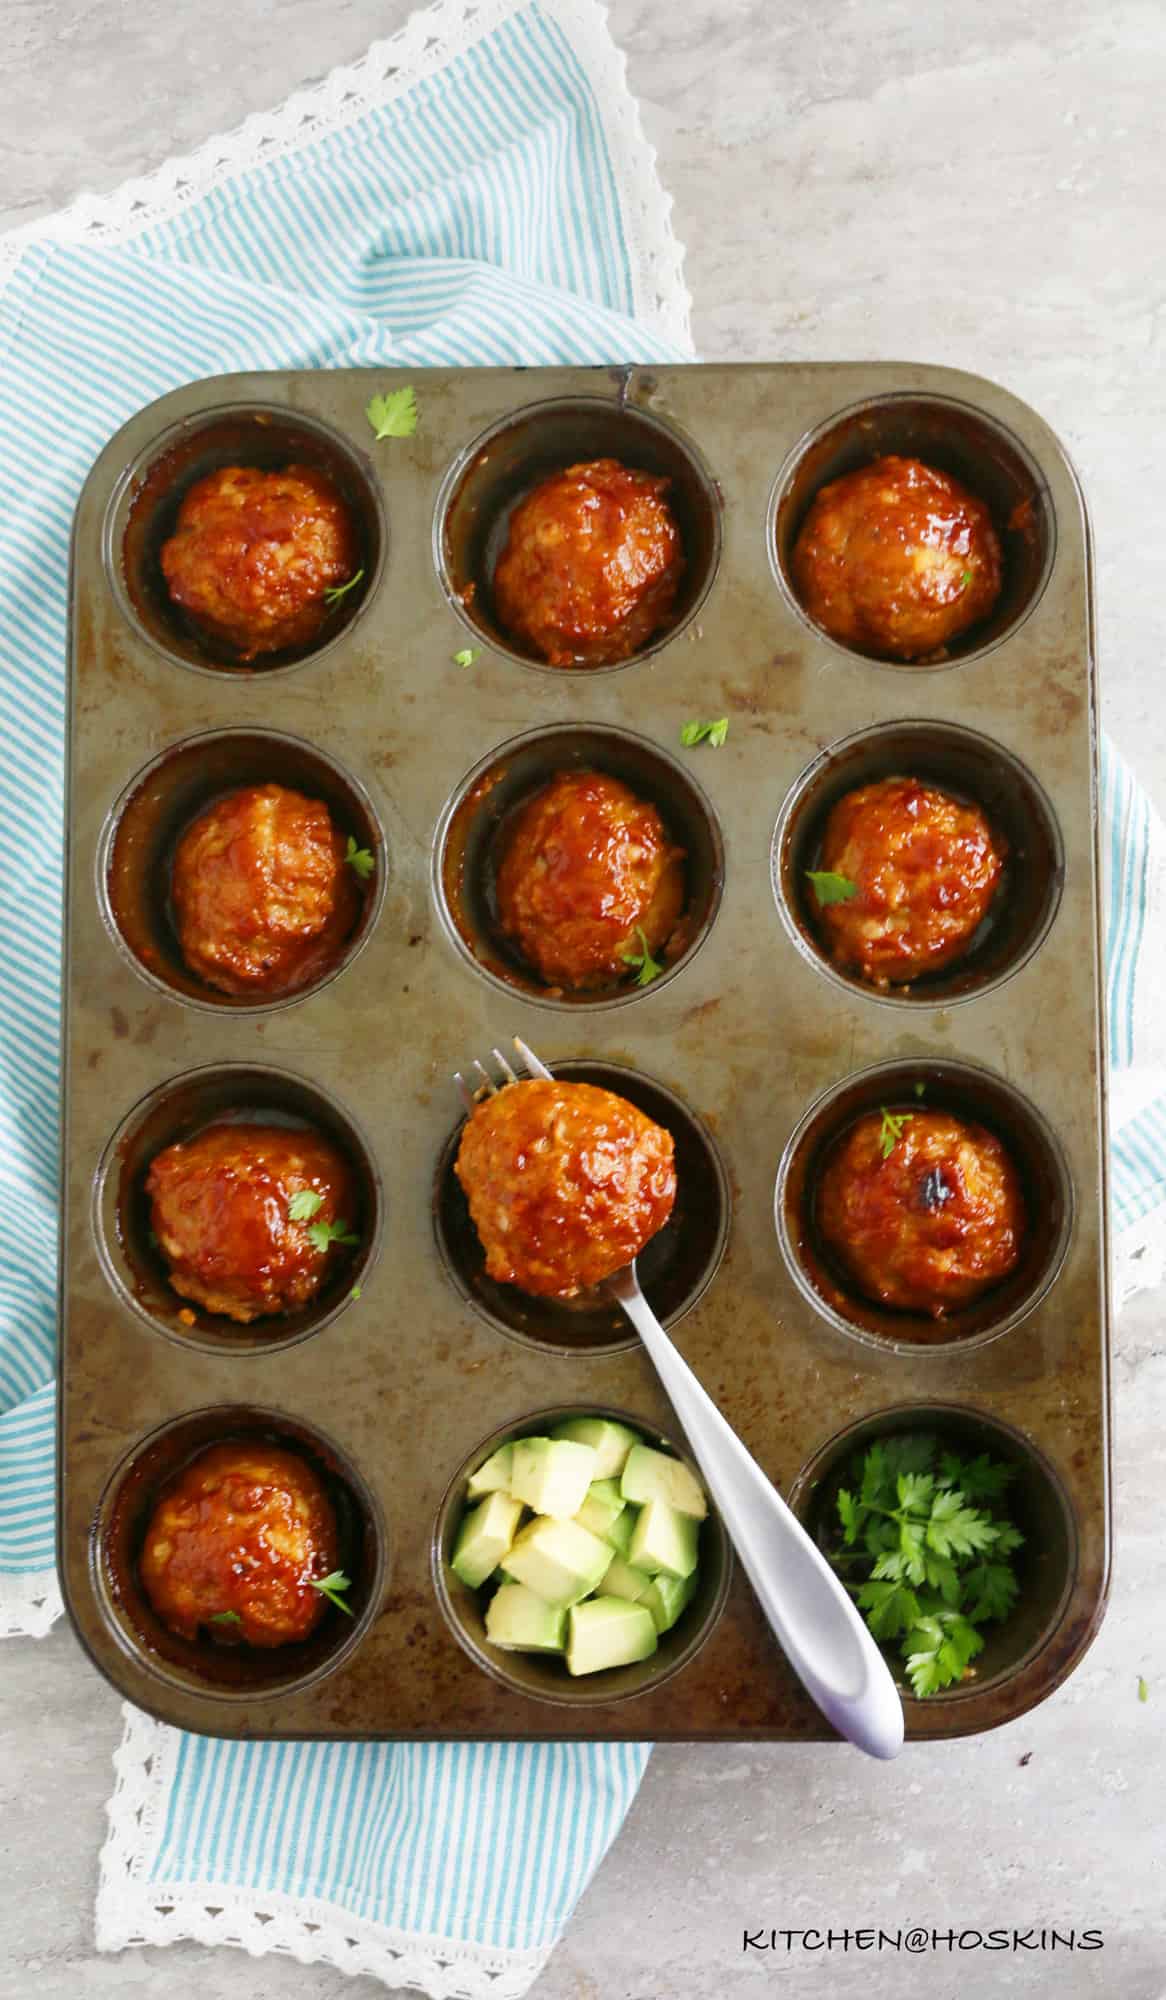 BAKED BARBECUE CHICKEN MEATBALLS WITH AVOCADO